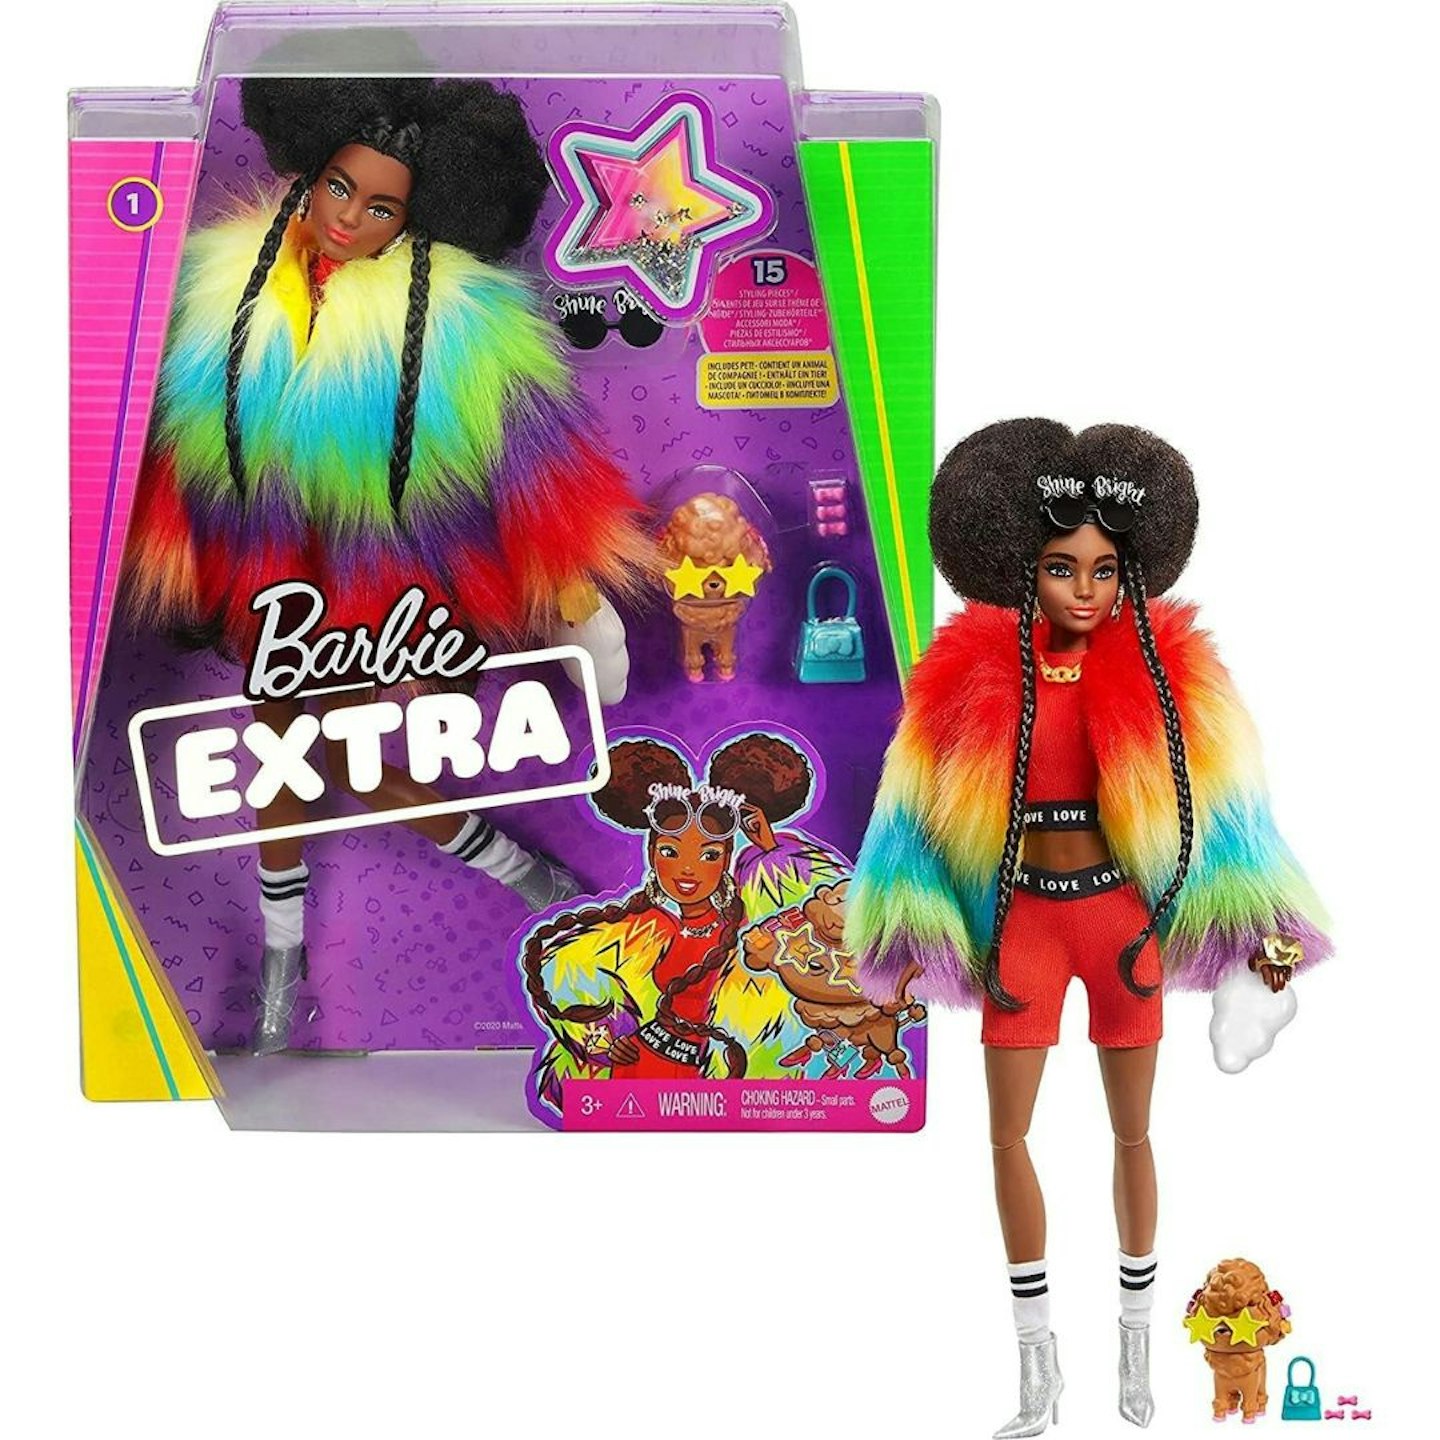 Best Diverse Toys: Barbie Extra Fashion Doll with Afro-Puffs and Shaggy Rainbow Coat